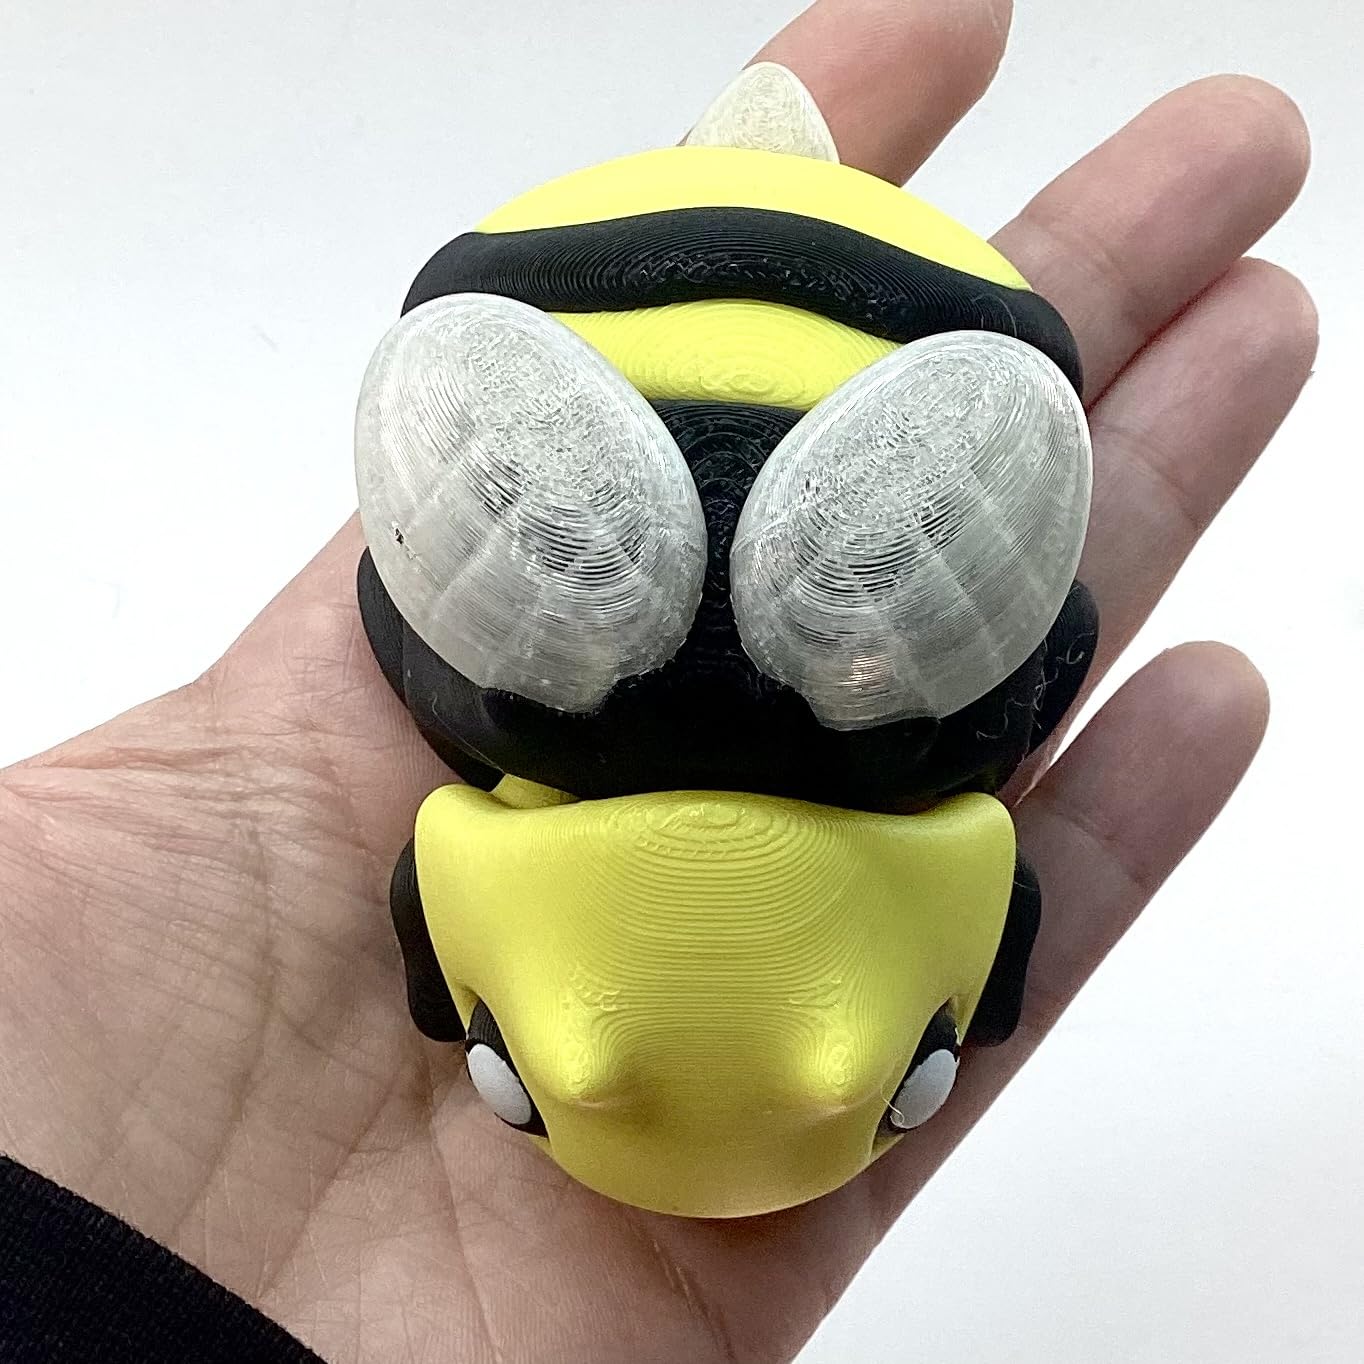 Fidget Bumble Bee 3D Printed Articulated Spring Toy Stress Relief Desk Toy for Kids Adults Layers in Green